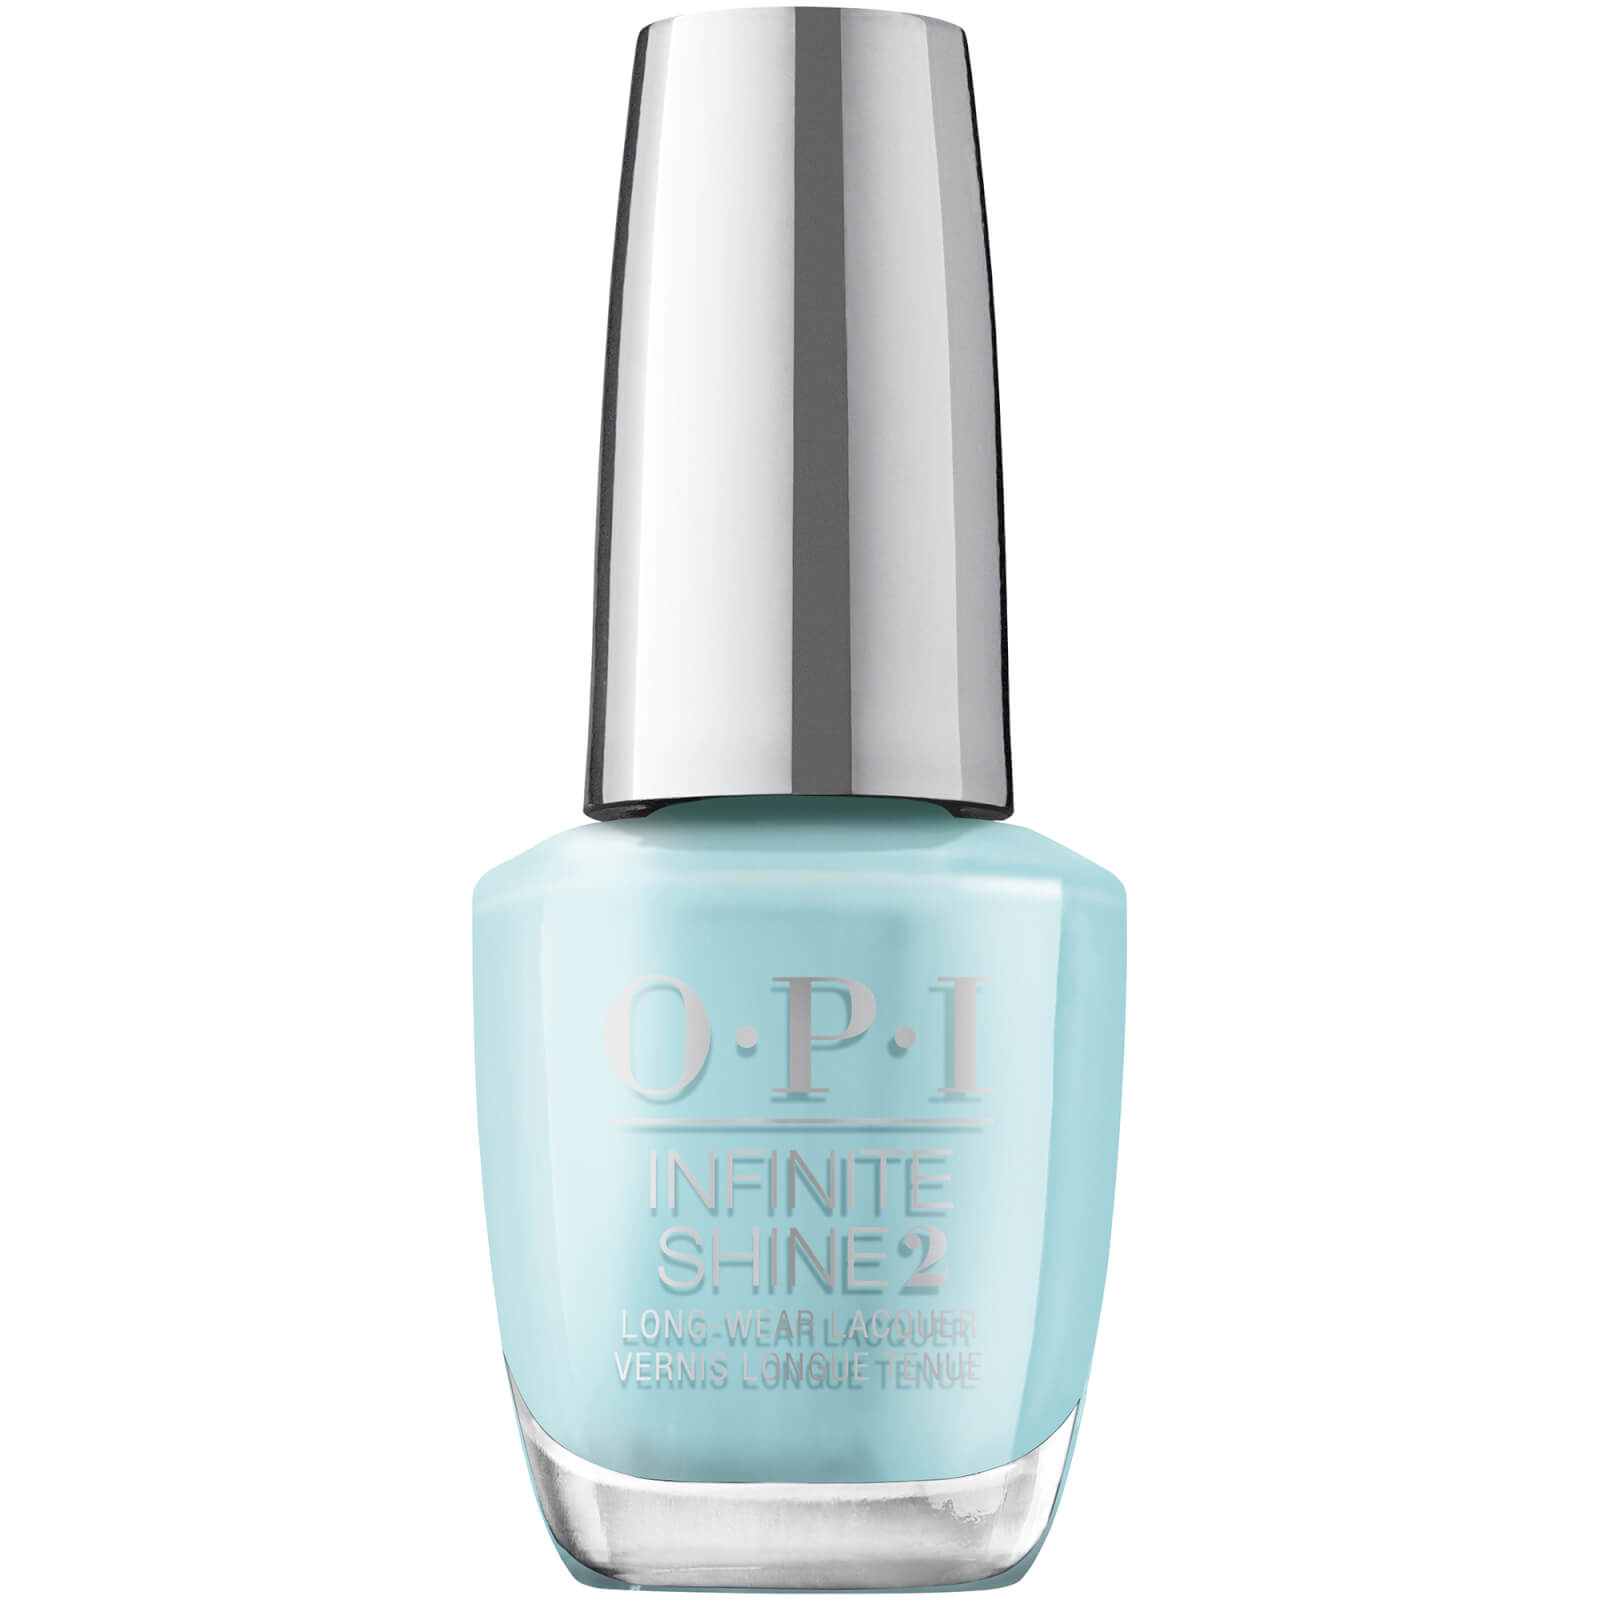 Opi Me, Myself And  Infinite Shine Long-wear Nail Polish 15ml (various Shades) - Nftease Me In Blue